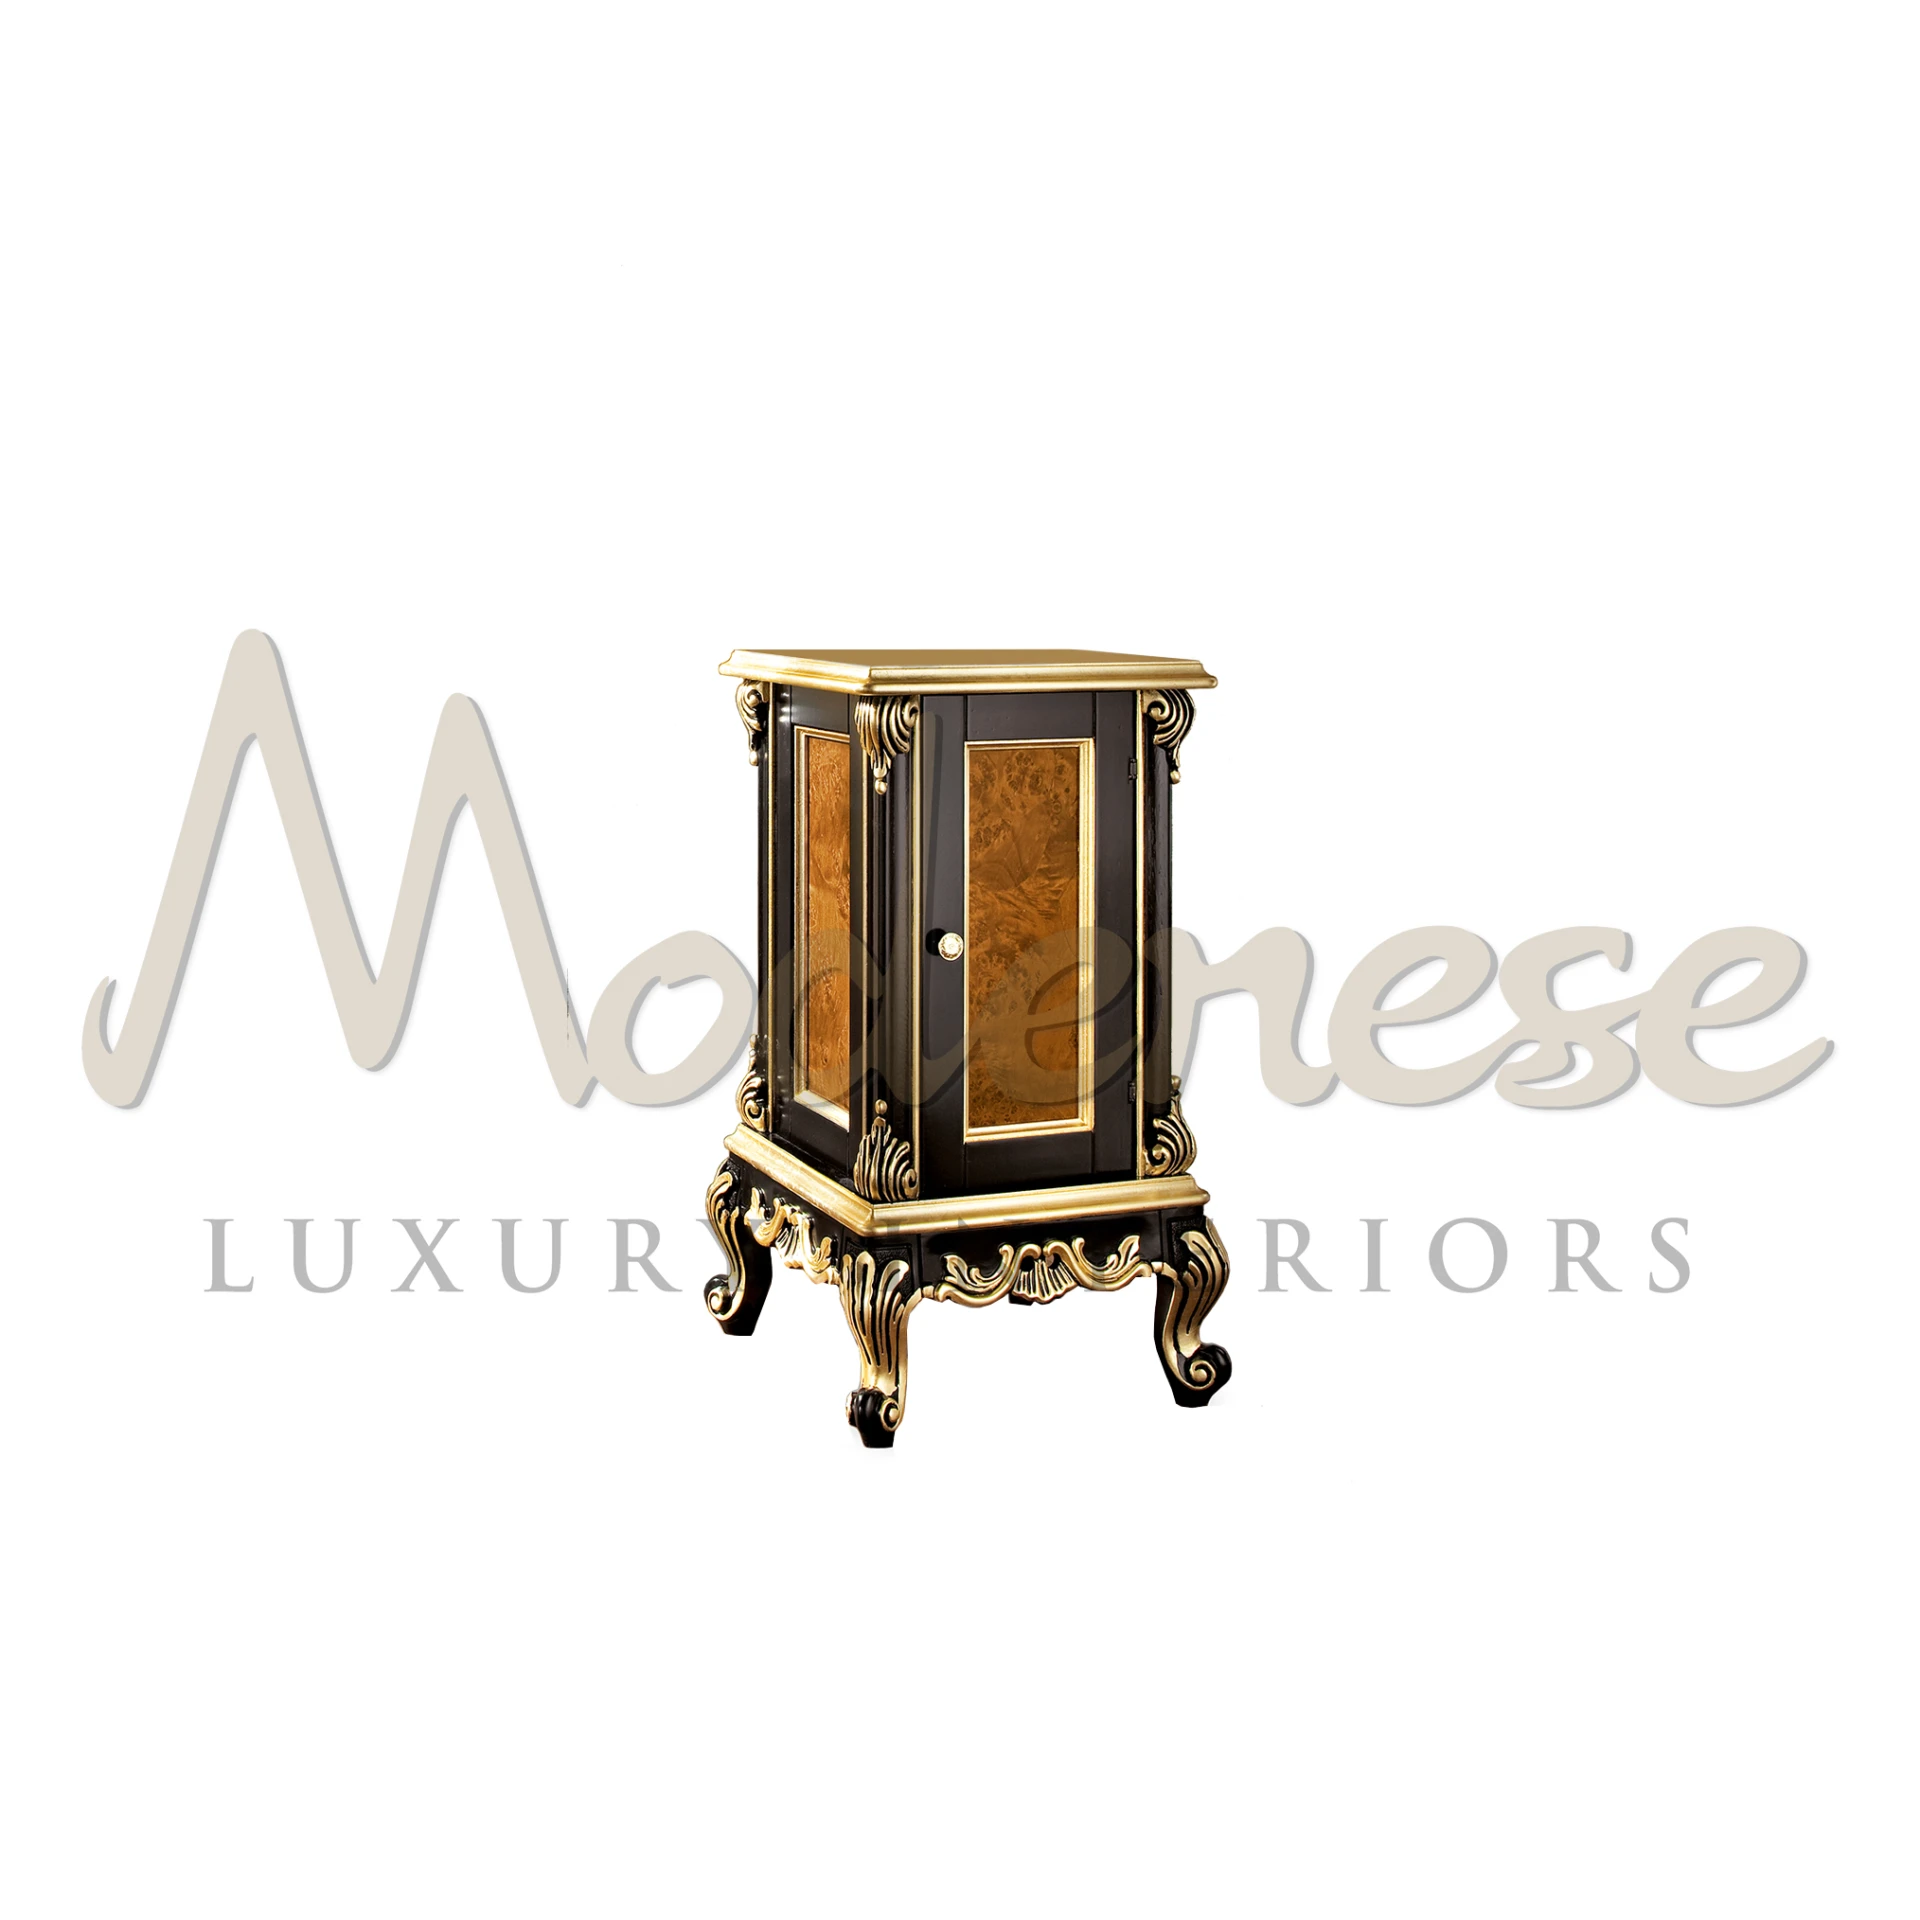 Luxury Radica Vase Stand with Black Lacquered Finish and Gold Leaf Detailing
